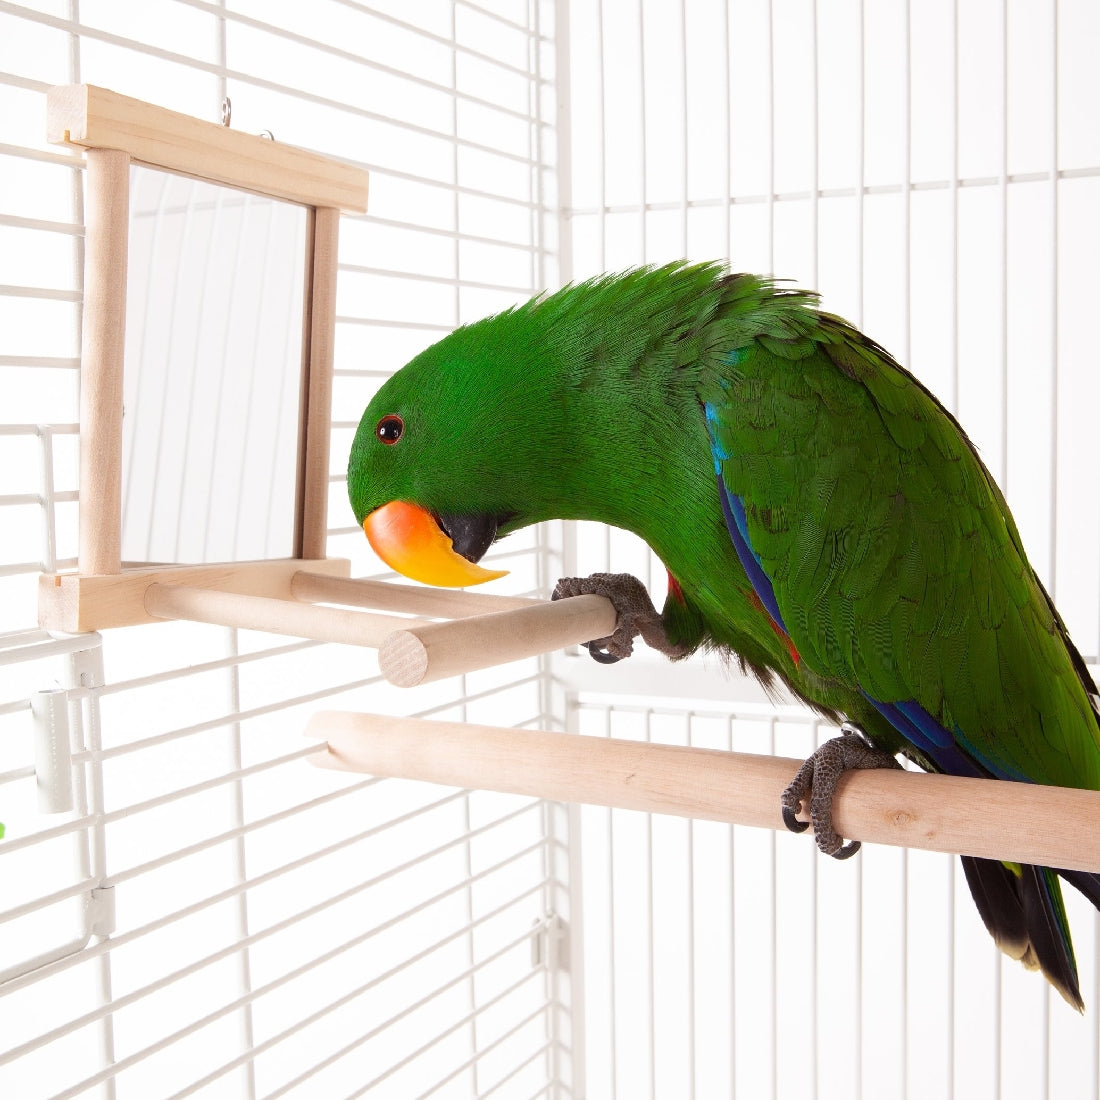 Green parrot on a perch inside cage, near bird toy, ecological.